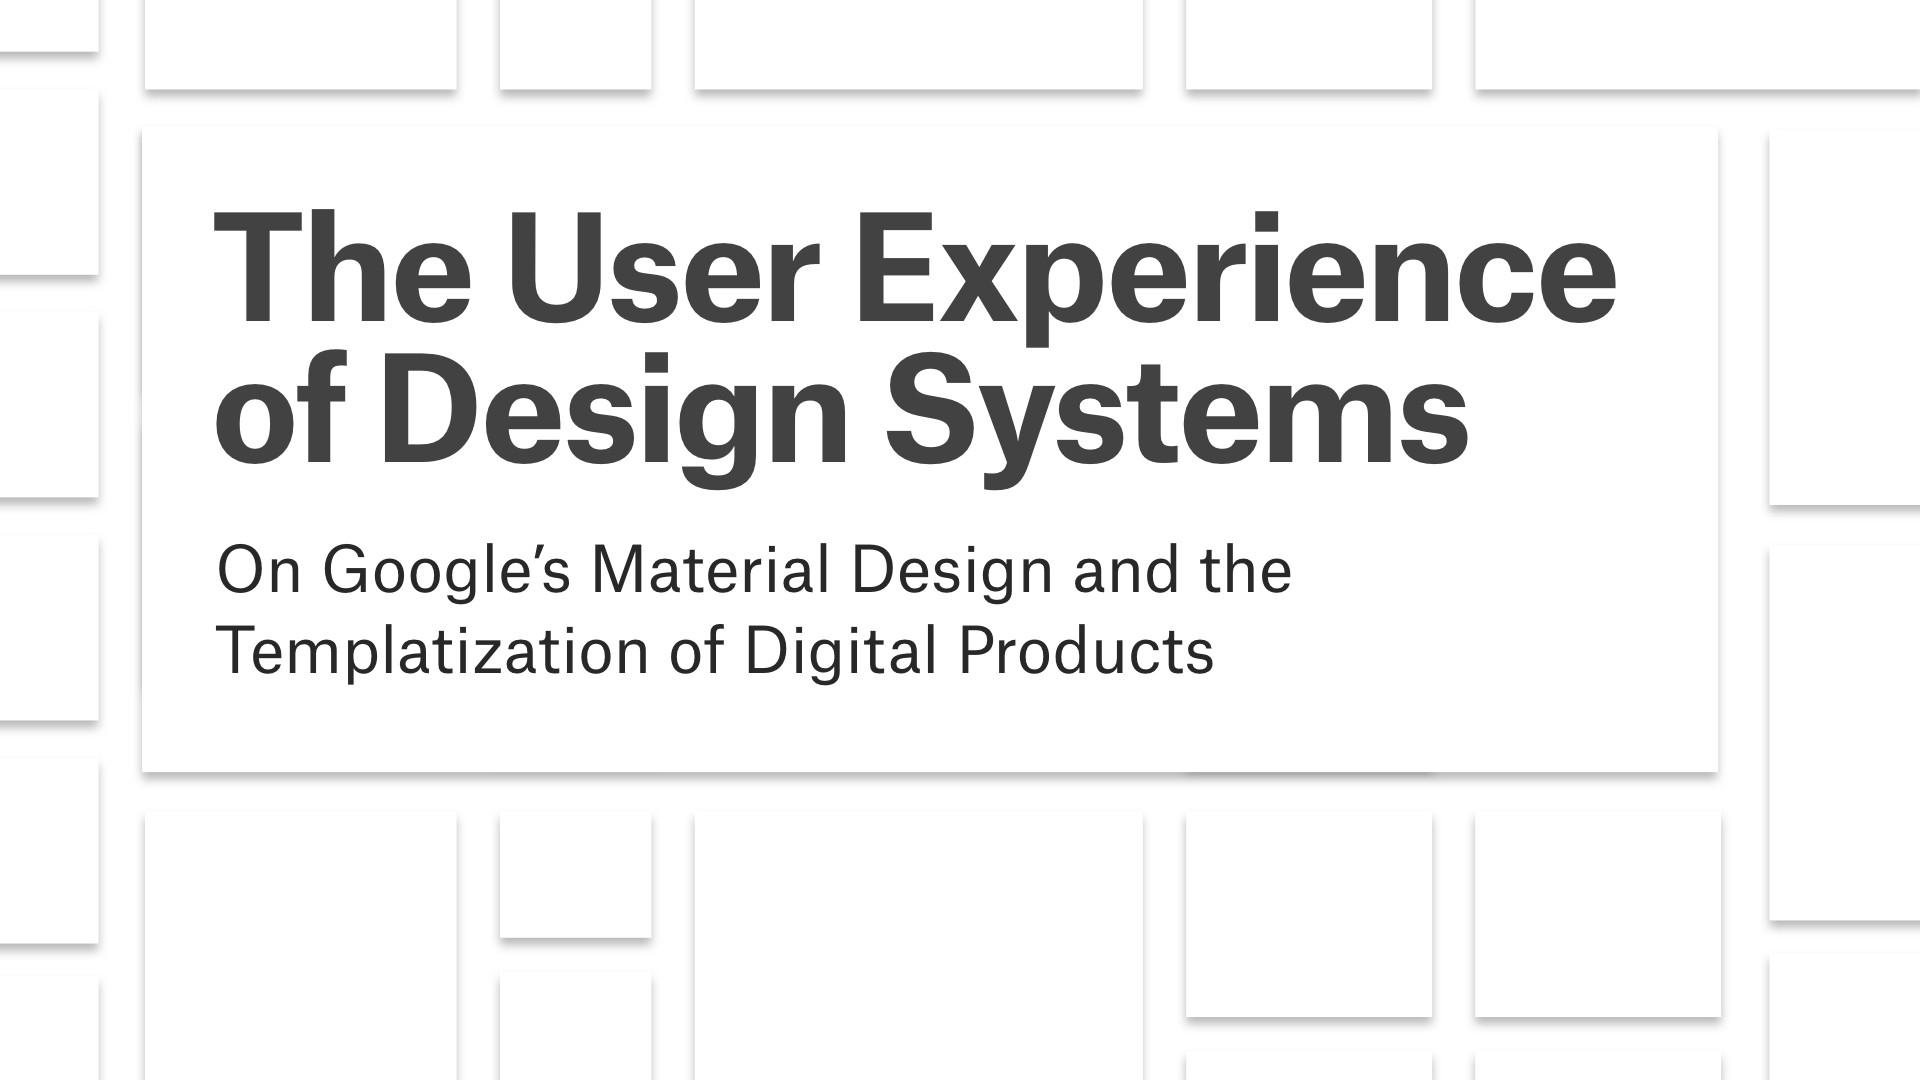 Cover slide that writes: The User Experience of Design Systems,On Google’s Material Design and the Templatization of Digital Products. 